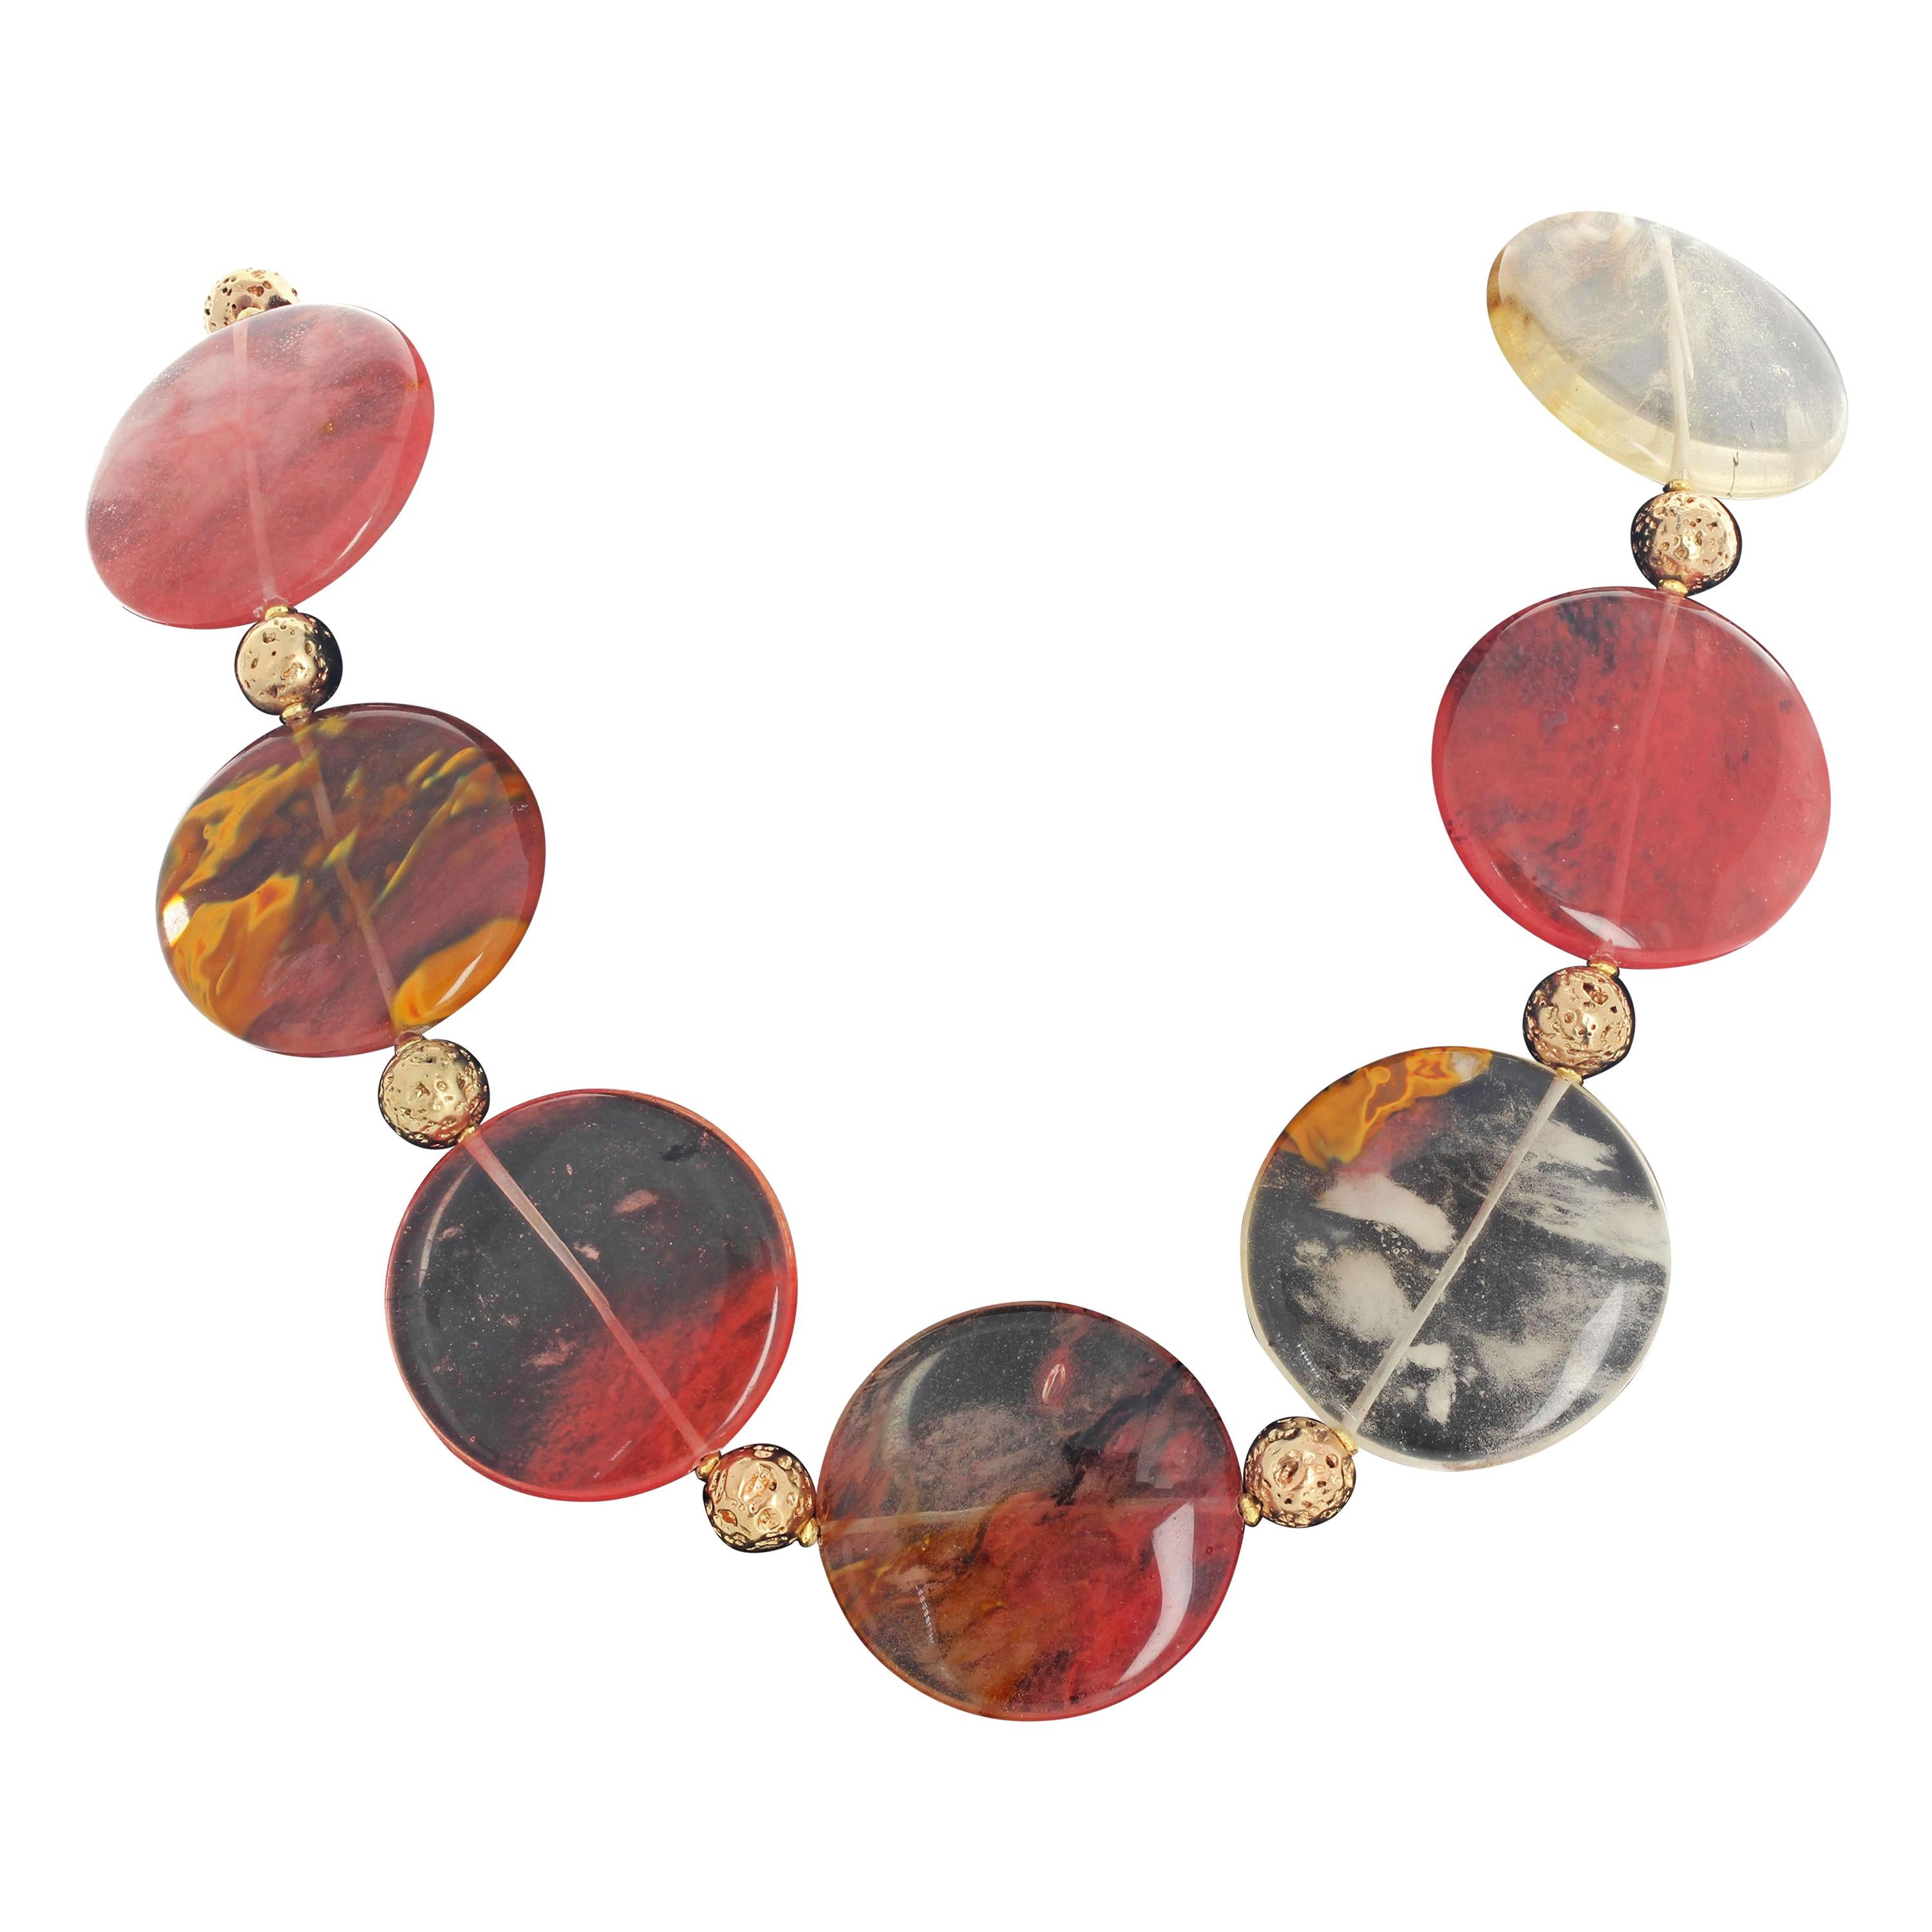 These amazing large highly polished round real Rutilated Quartz - 40 mm across - are enhanced with polished gold plated natural rondels 10 mm Lava beads set in this 22 inch long necklace with gold plated easy to use hook clasp.  The teeny tiny